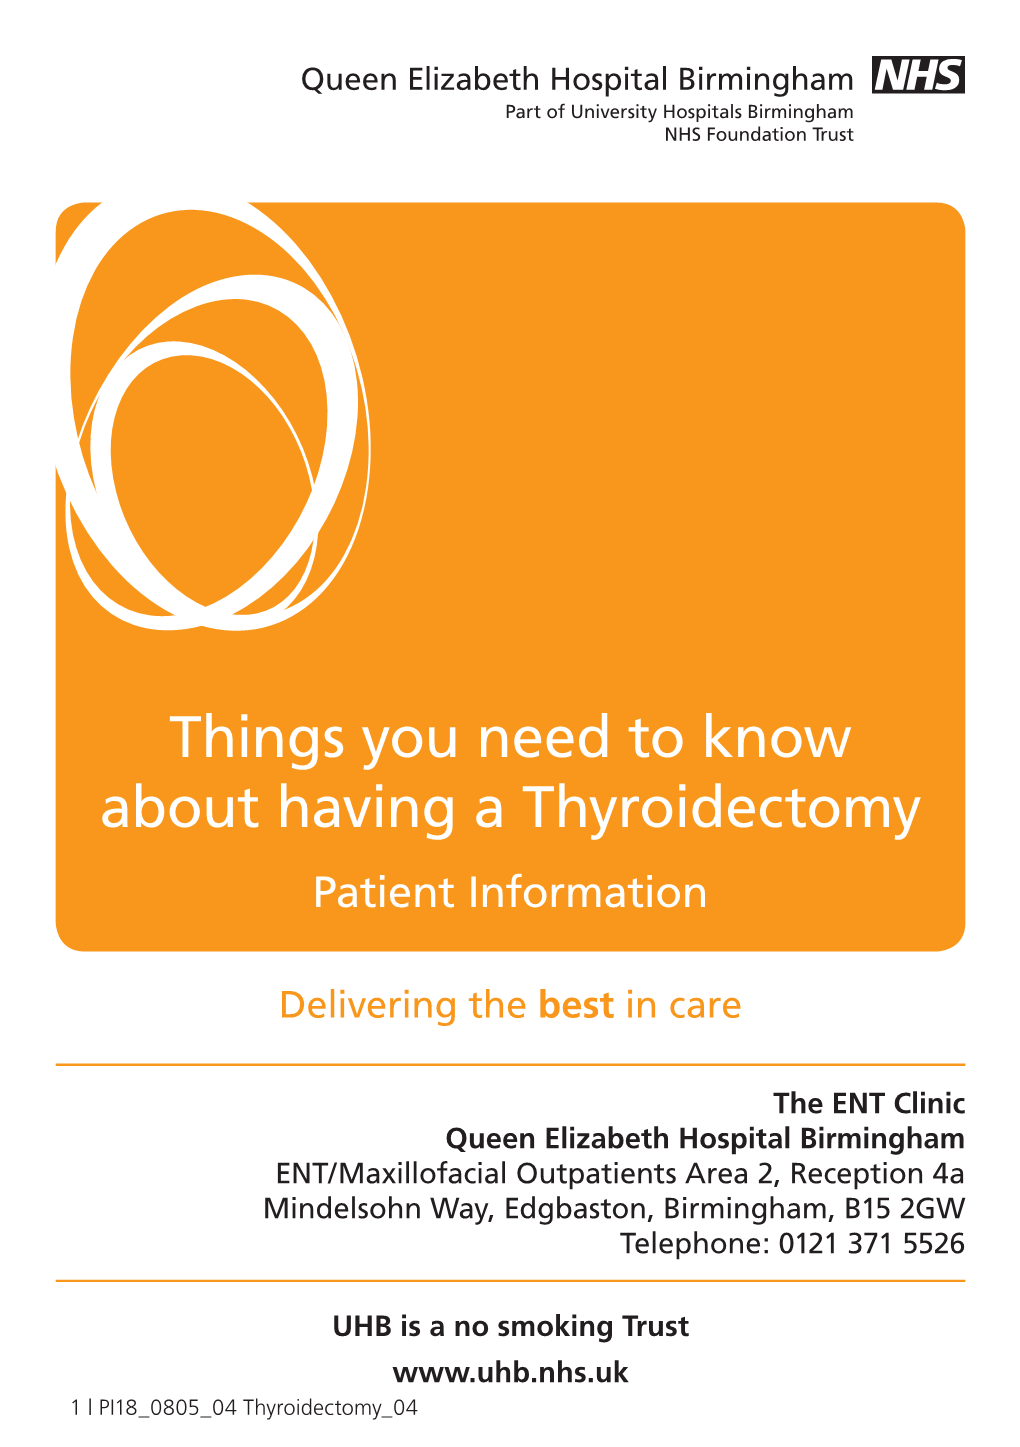 Things You Need to Know About Having a Thyroidectomy Patient Information